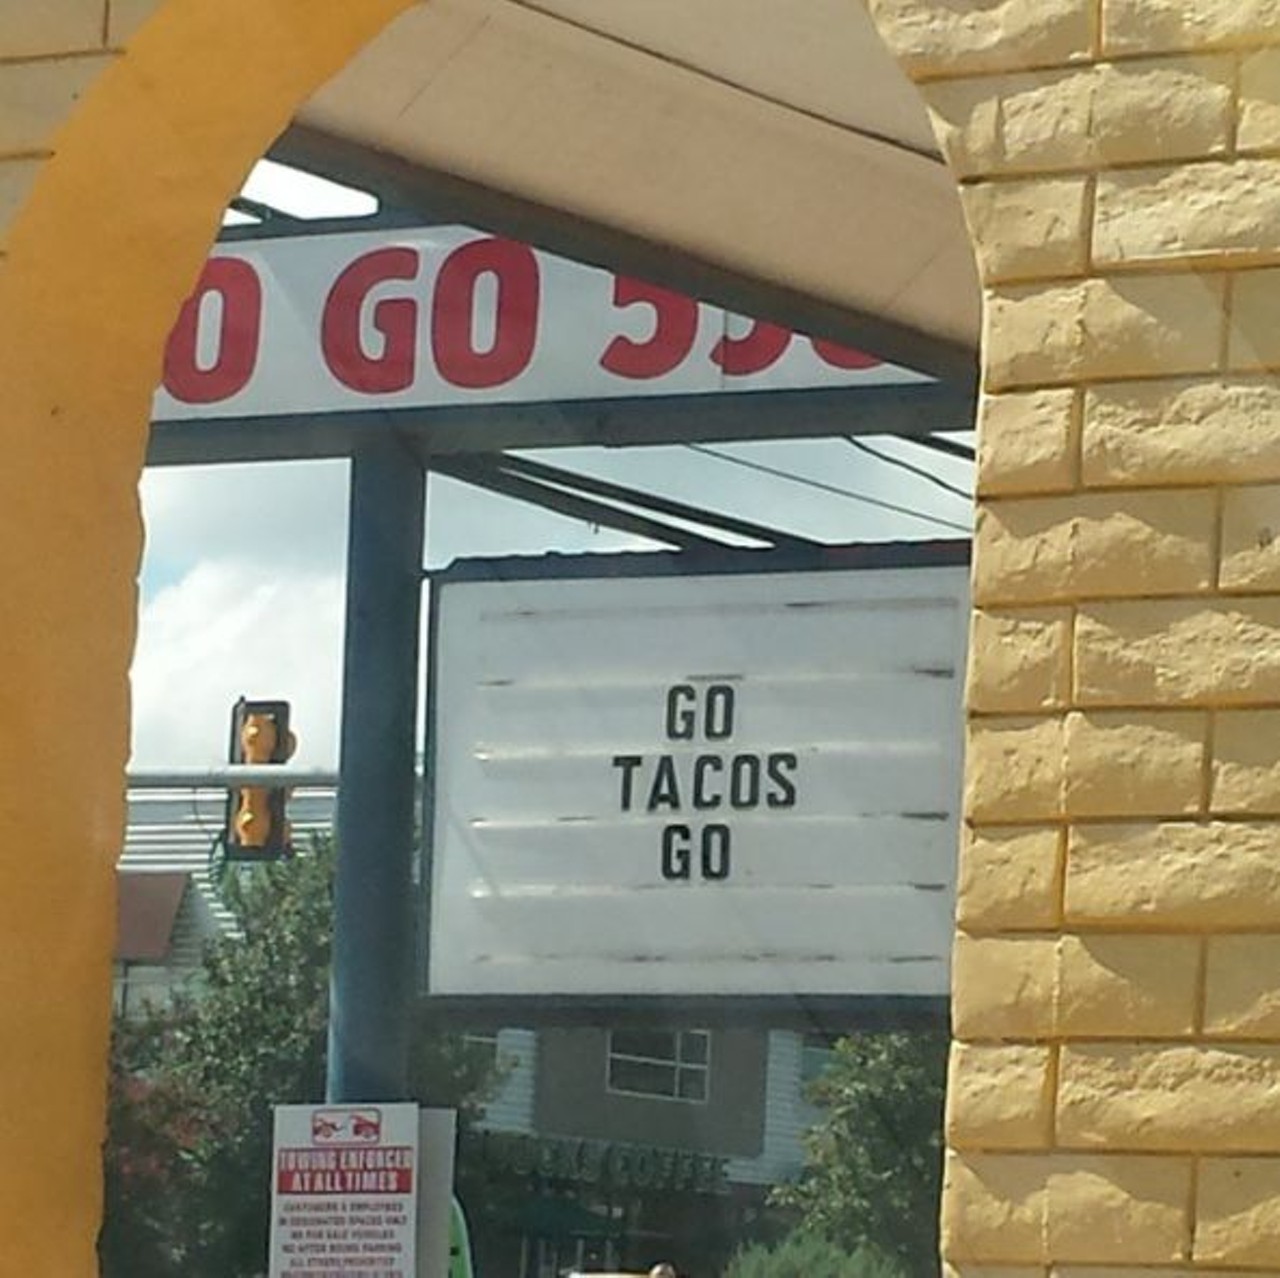 Tacos are everything
Breakfast tacos, mini tacos, puffy tacos, we ain&#146;t got no type.
Photo via Instagram, rell1925